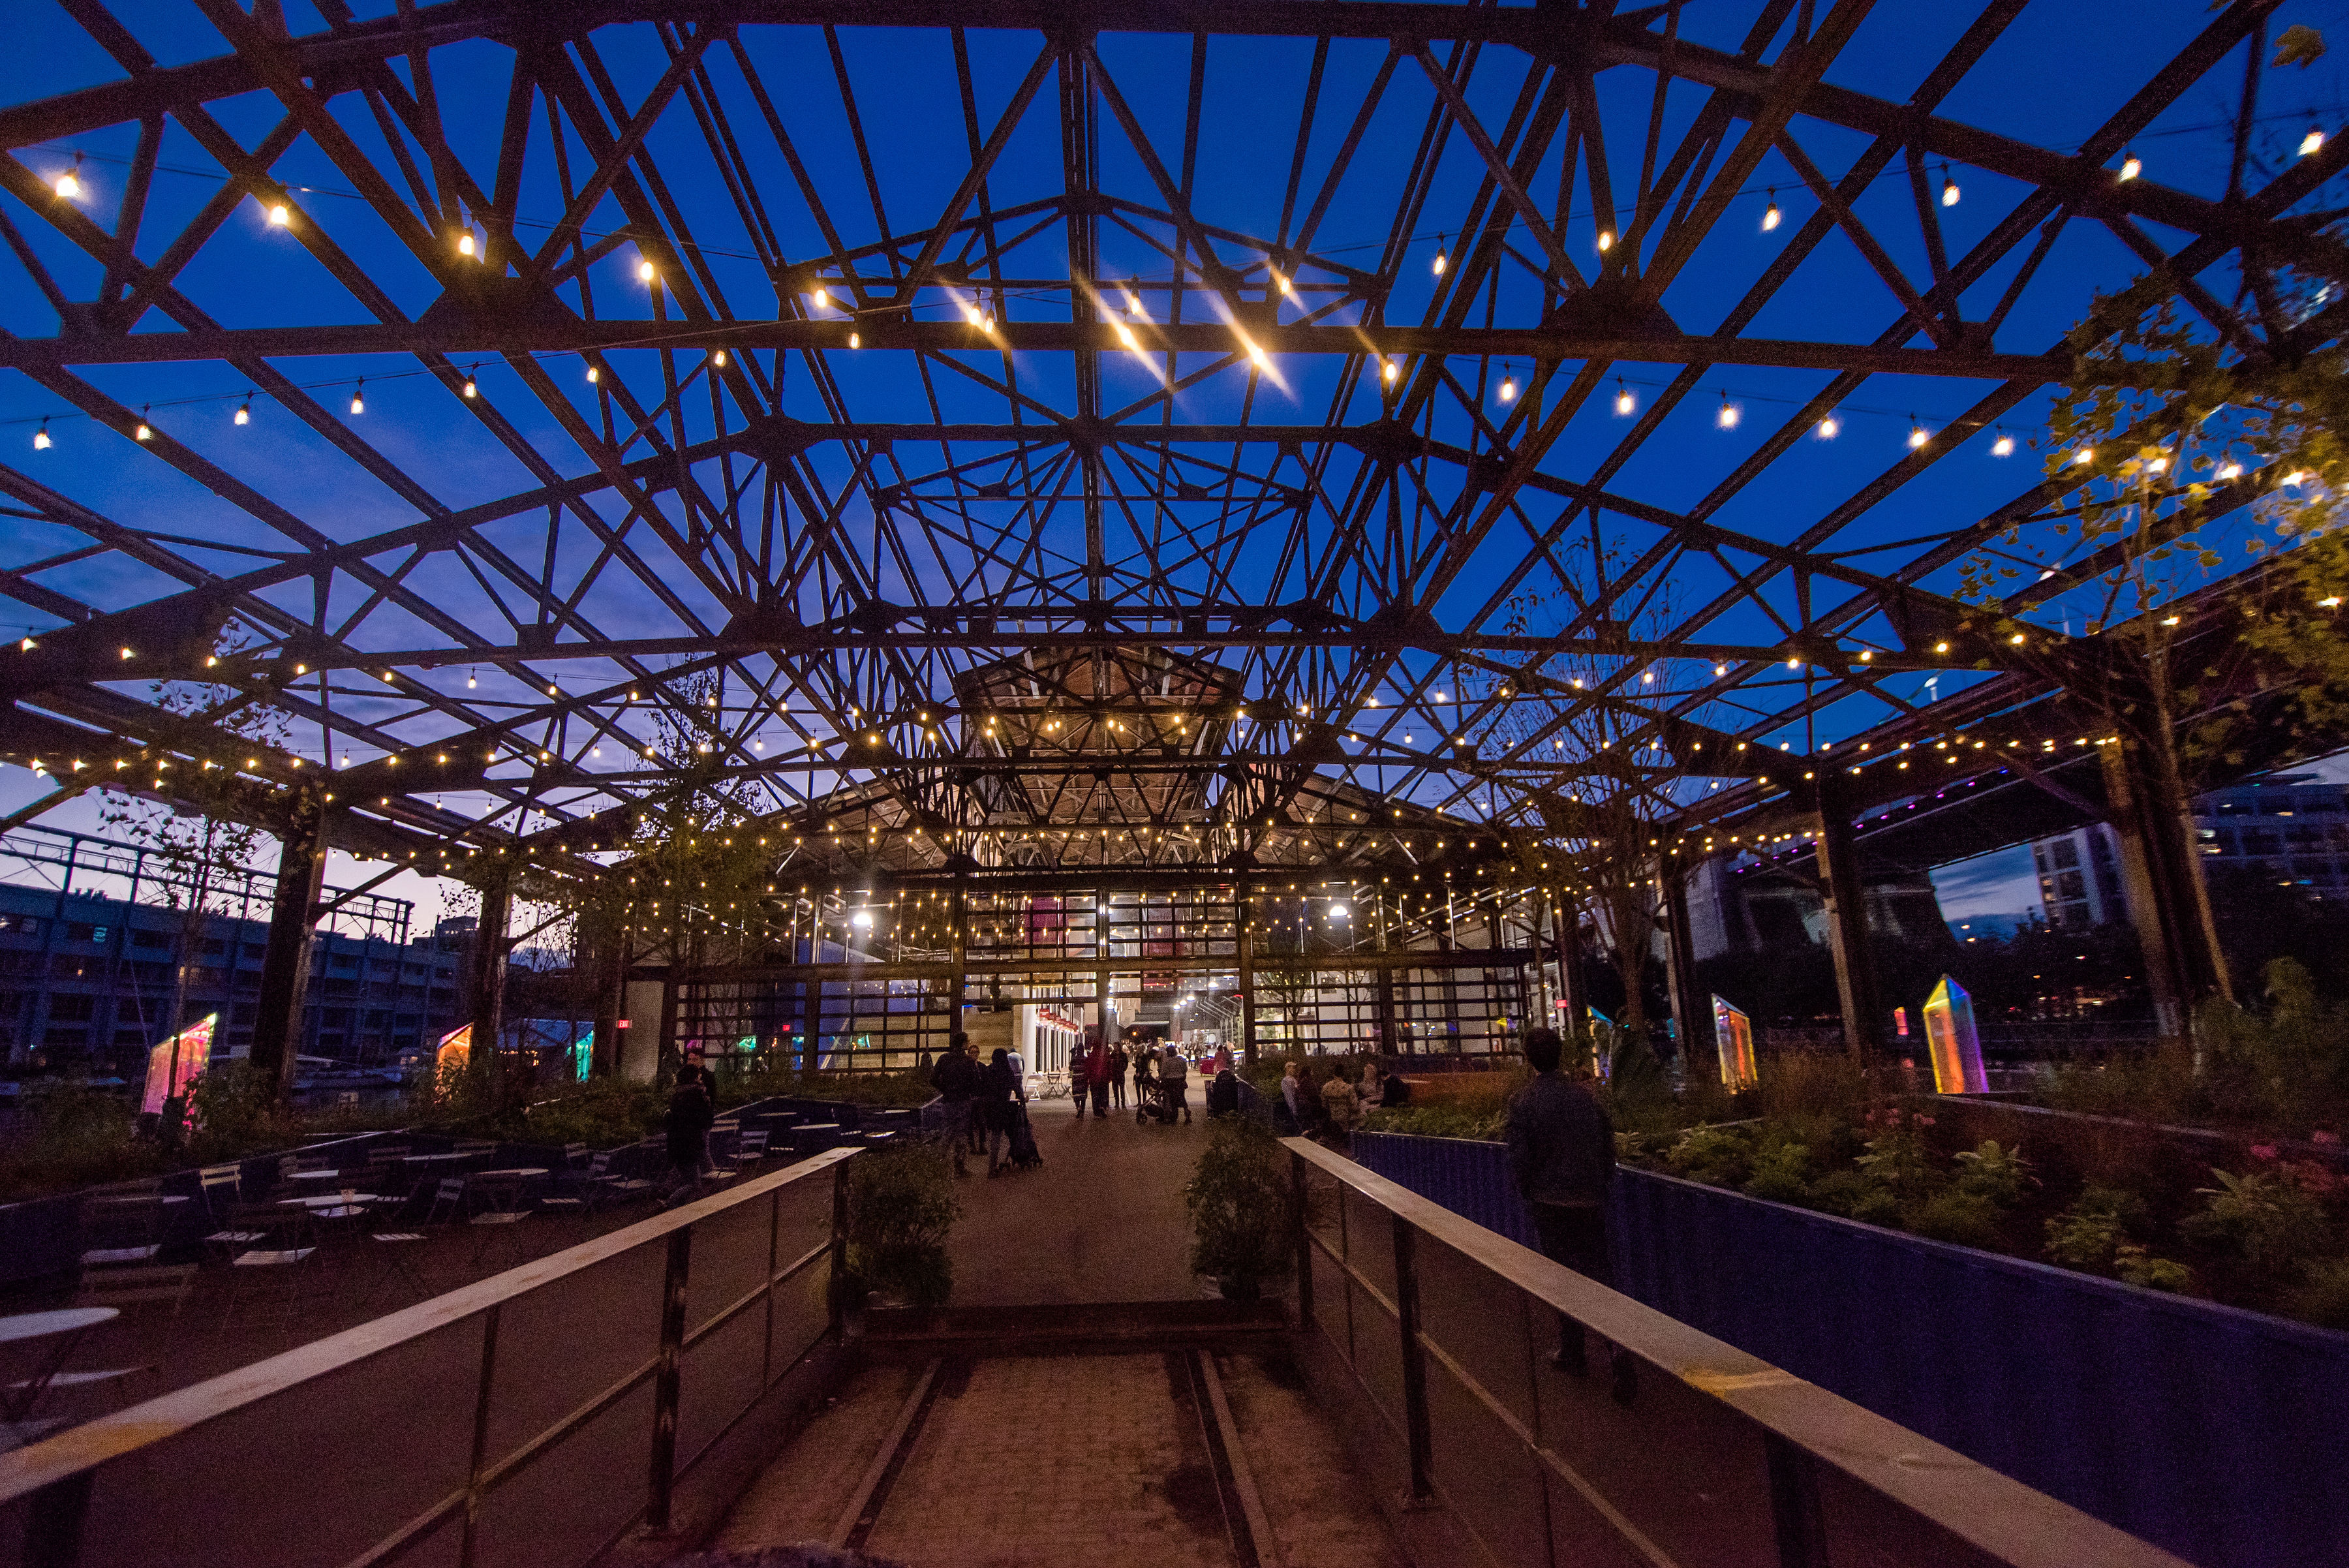 An outdoor area in Philadelphia with lights and an arched skylight.